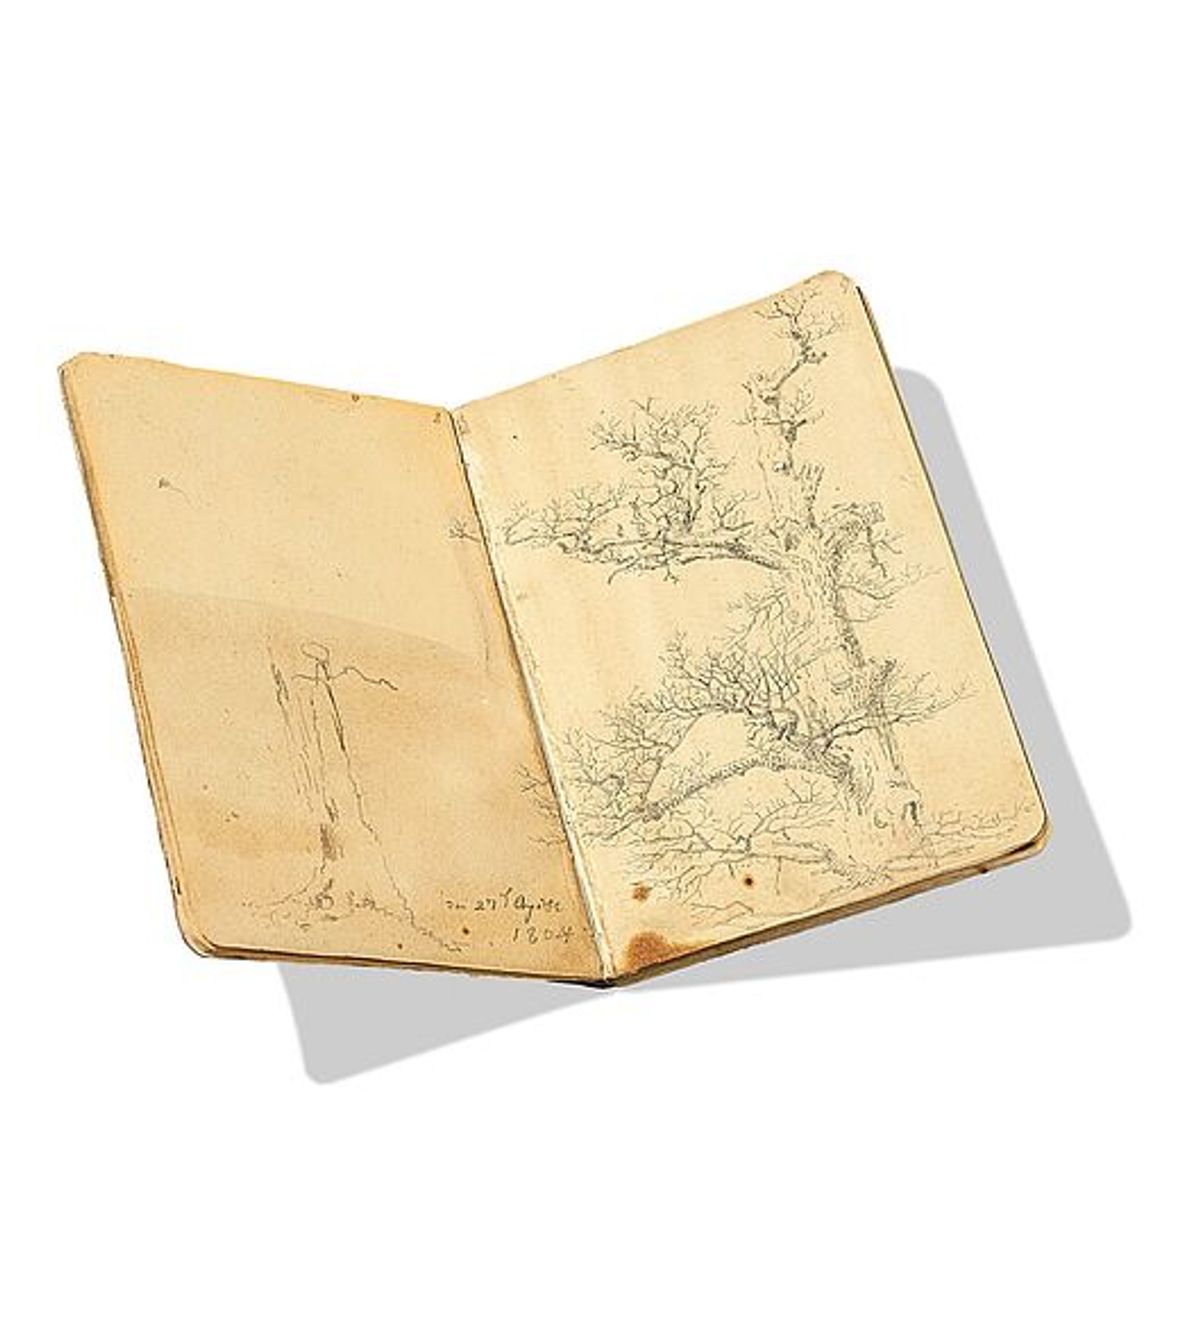 Caspar David Friedrich's 1804 sketchbook is due to be sold today at auction Image: courtesy of Grisebach